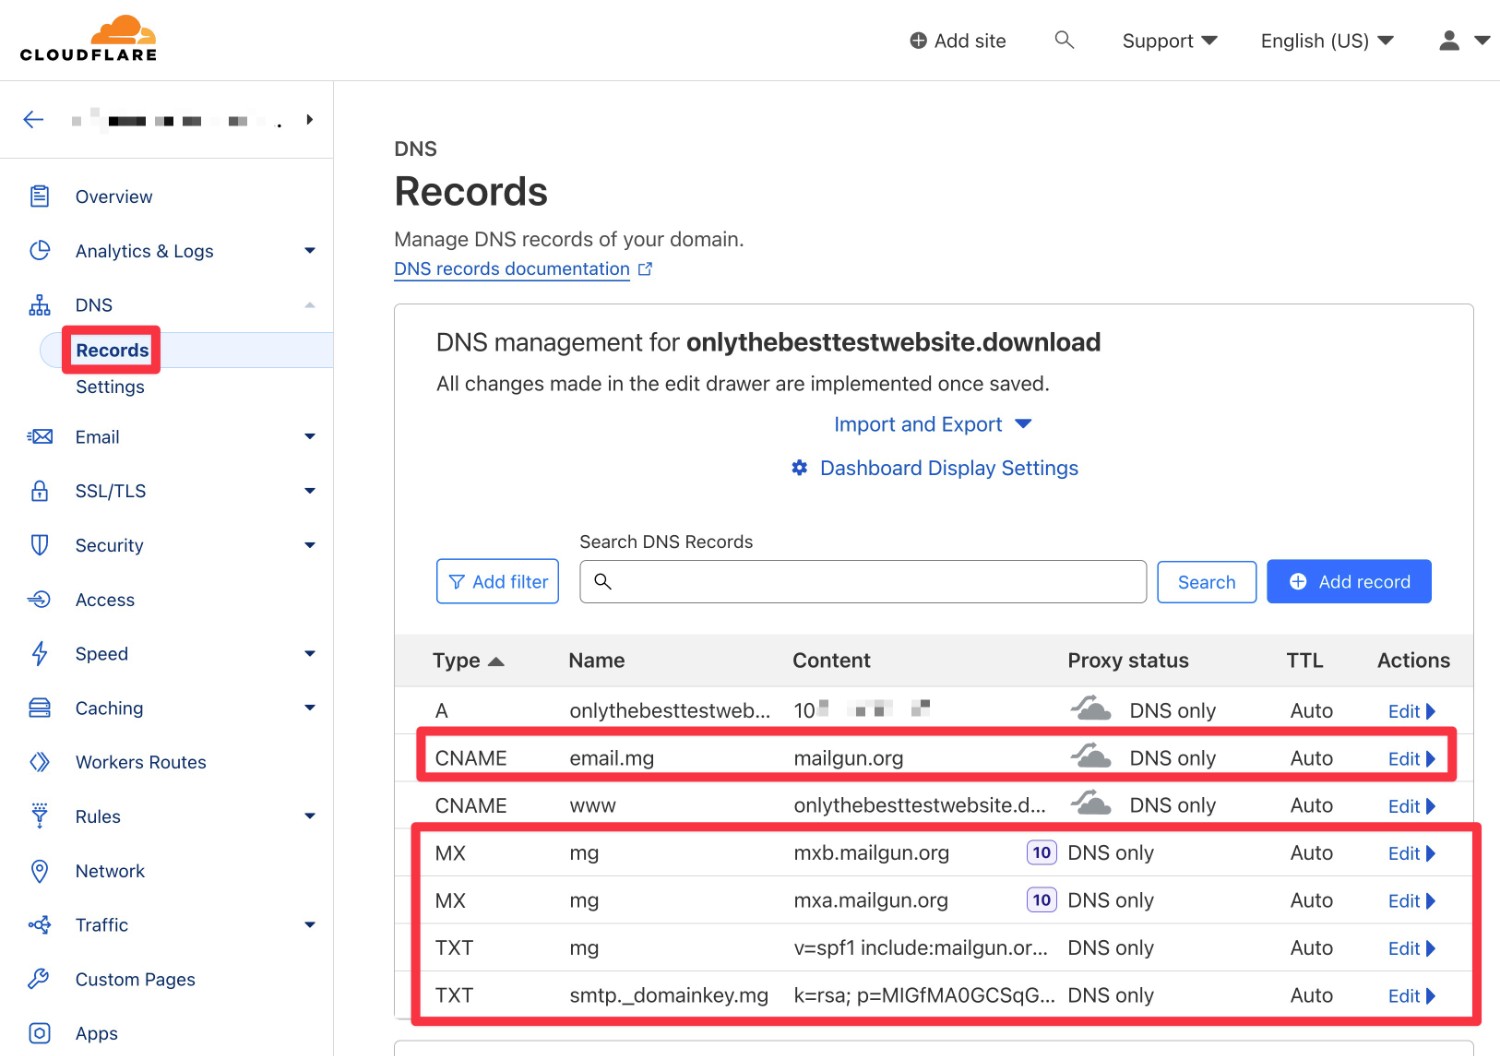 Adding DNS records to Cloudflare